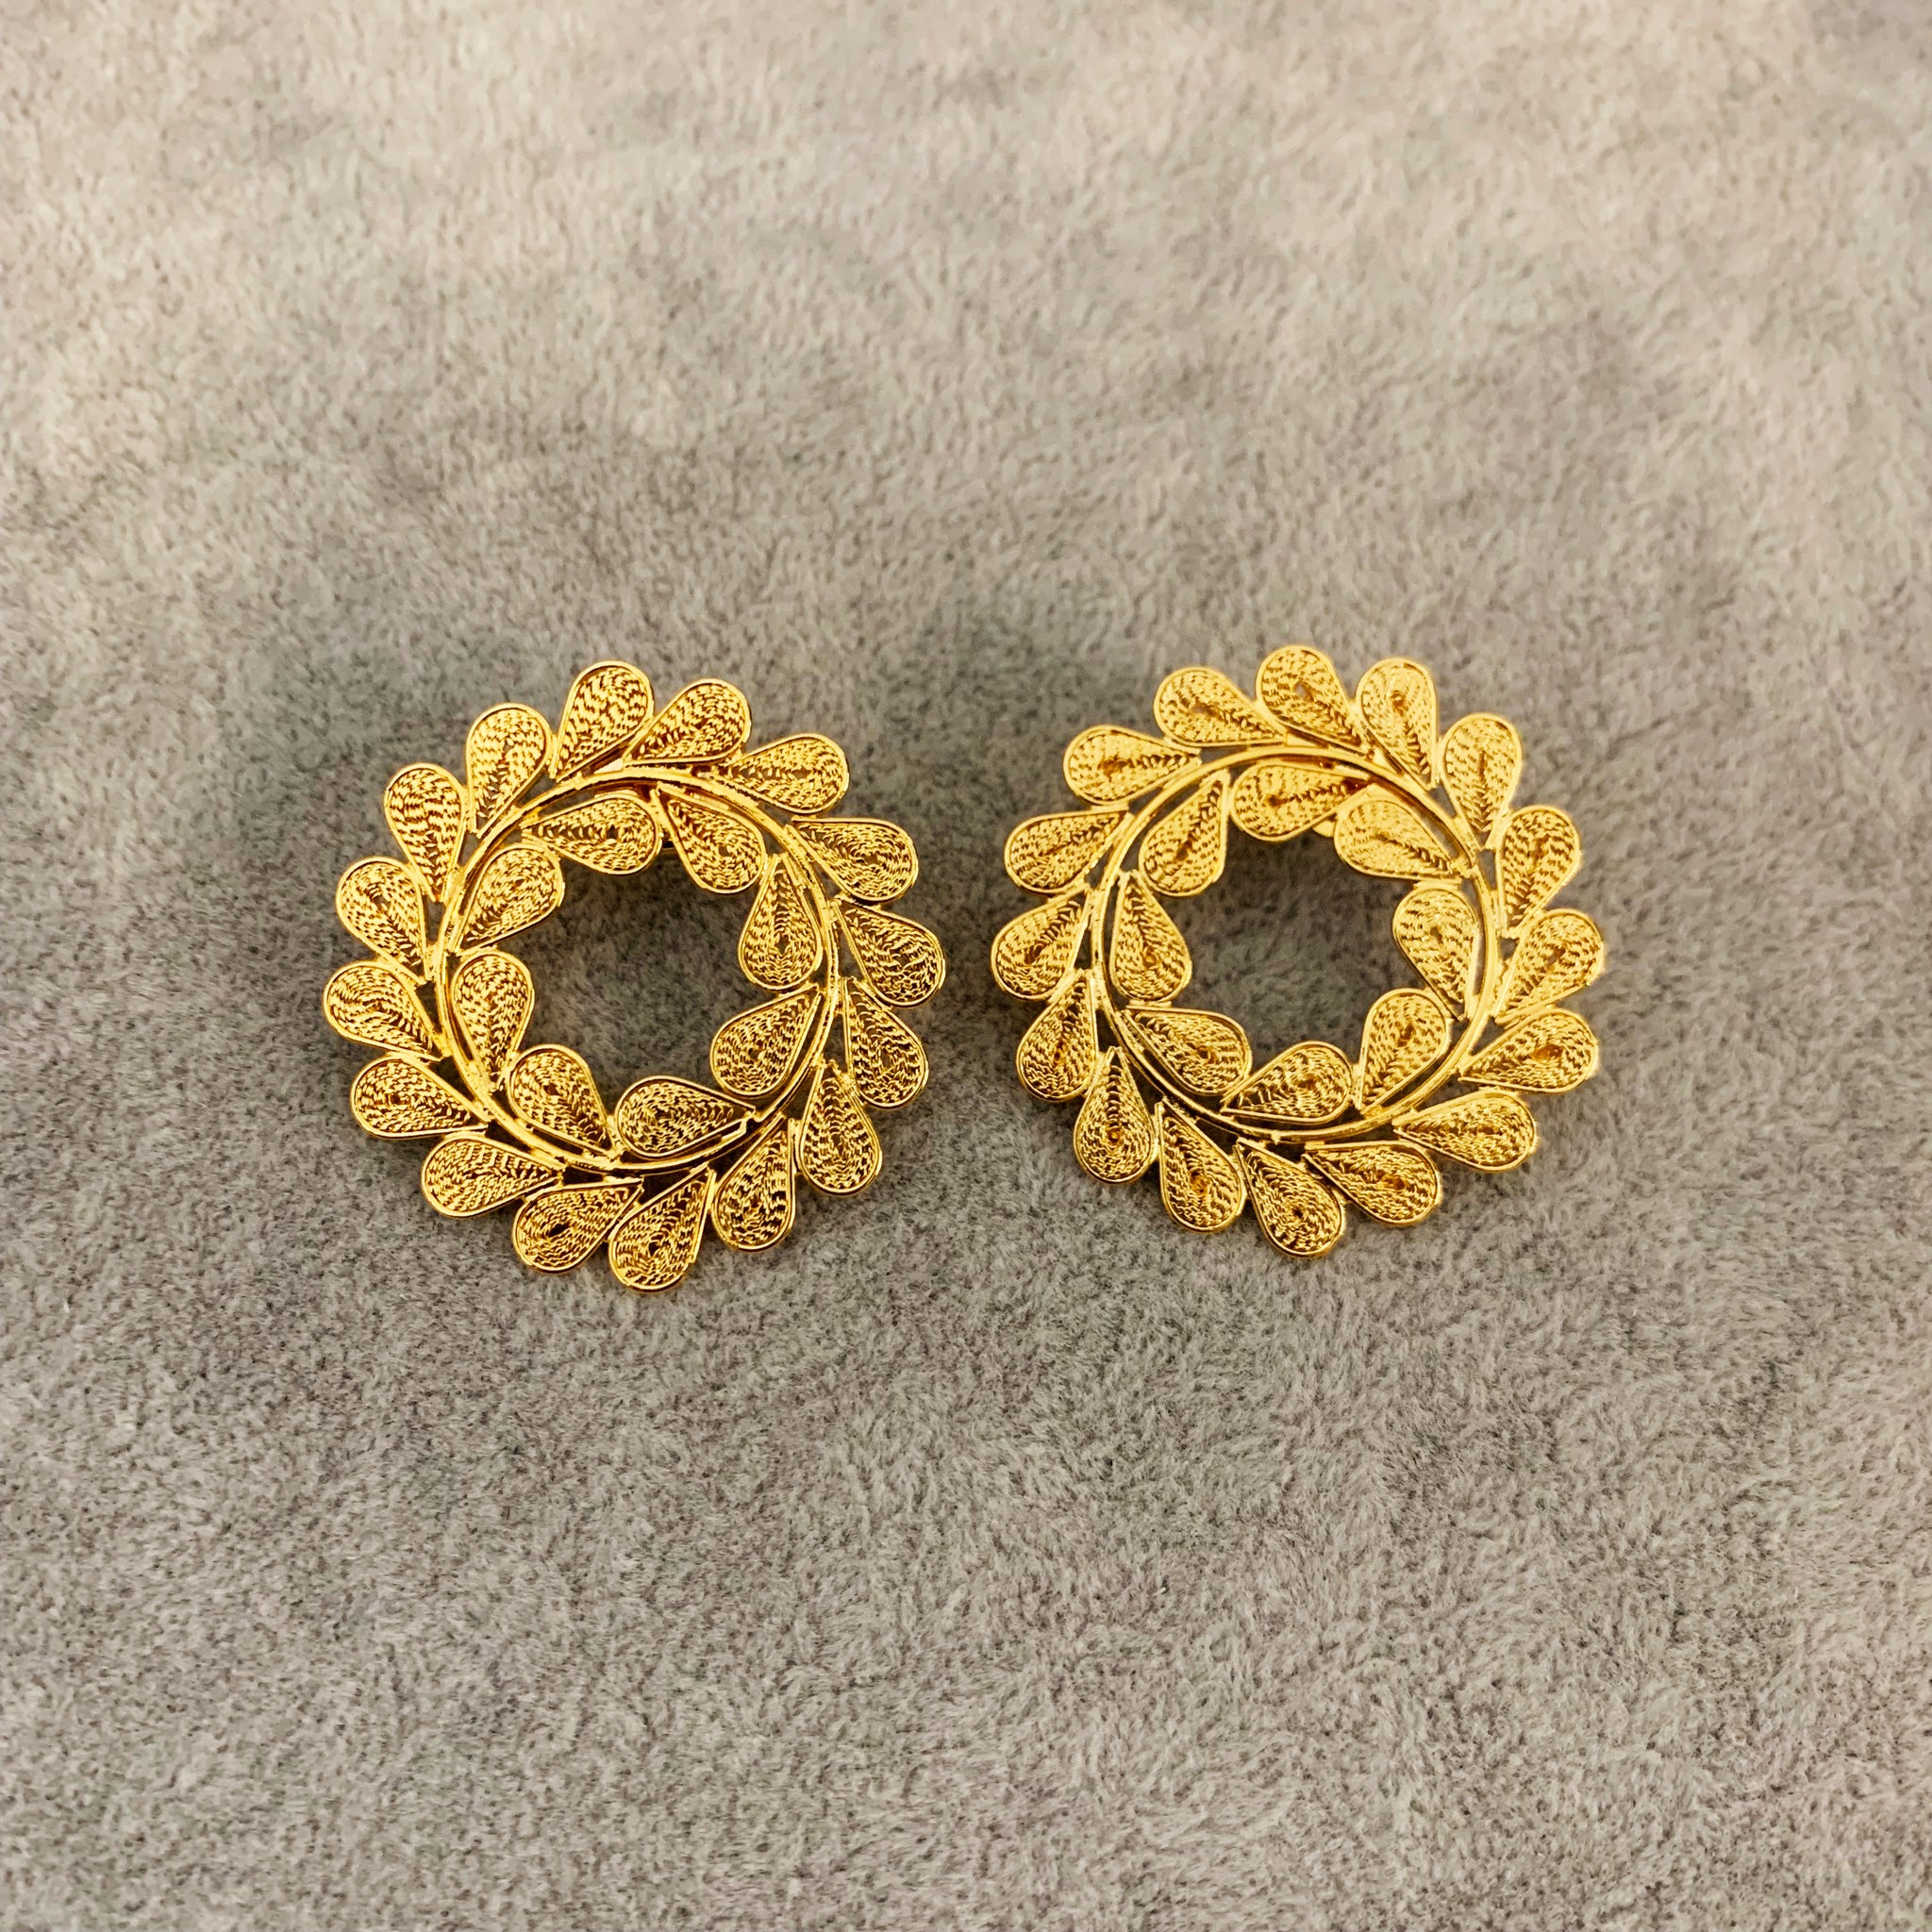 Gold circle leady earrings full view